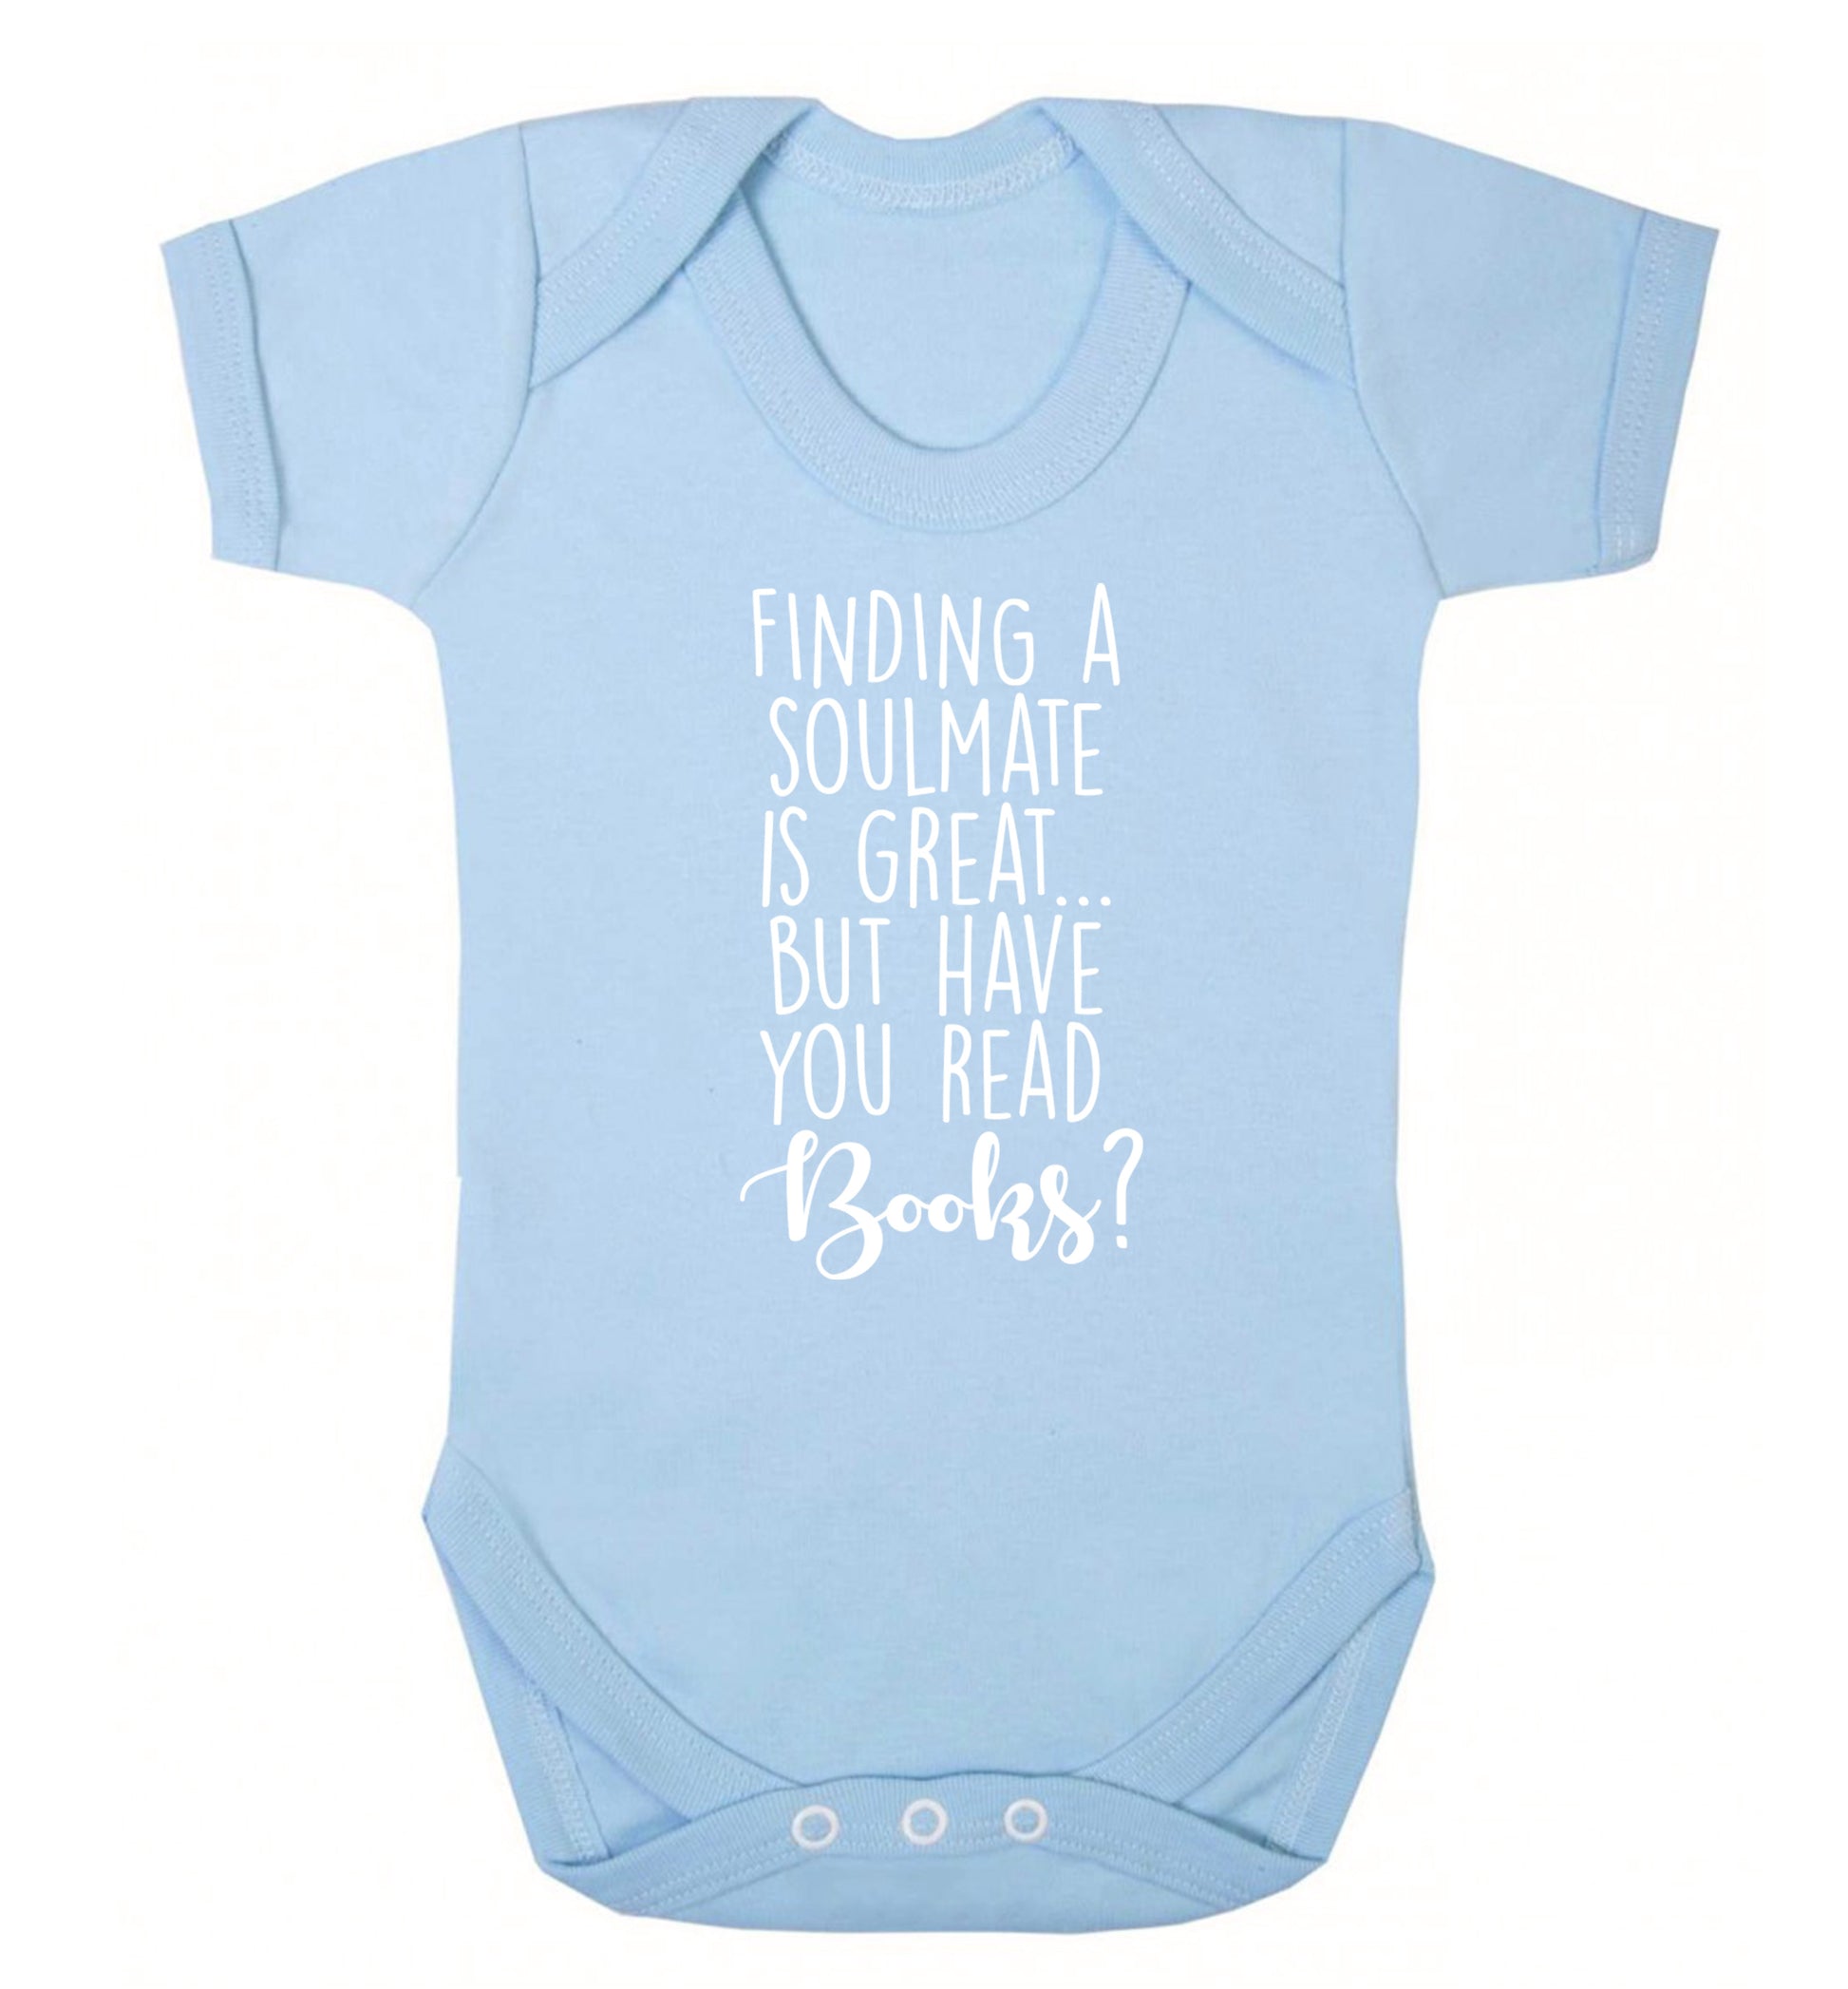 Finding a soulmate is great but have you read books? Baby Vest pale blue 18-24 months